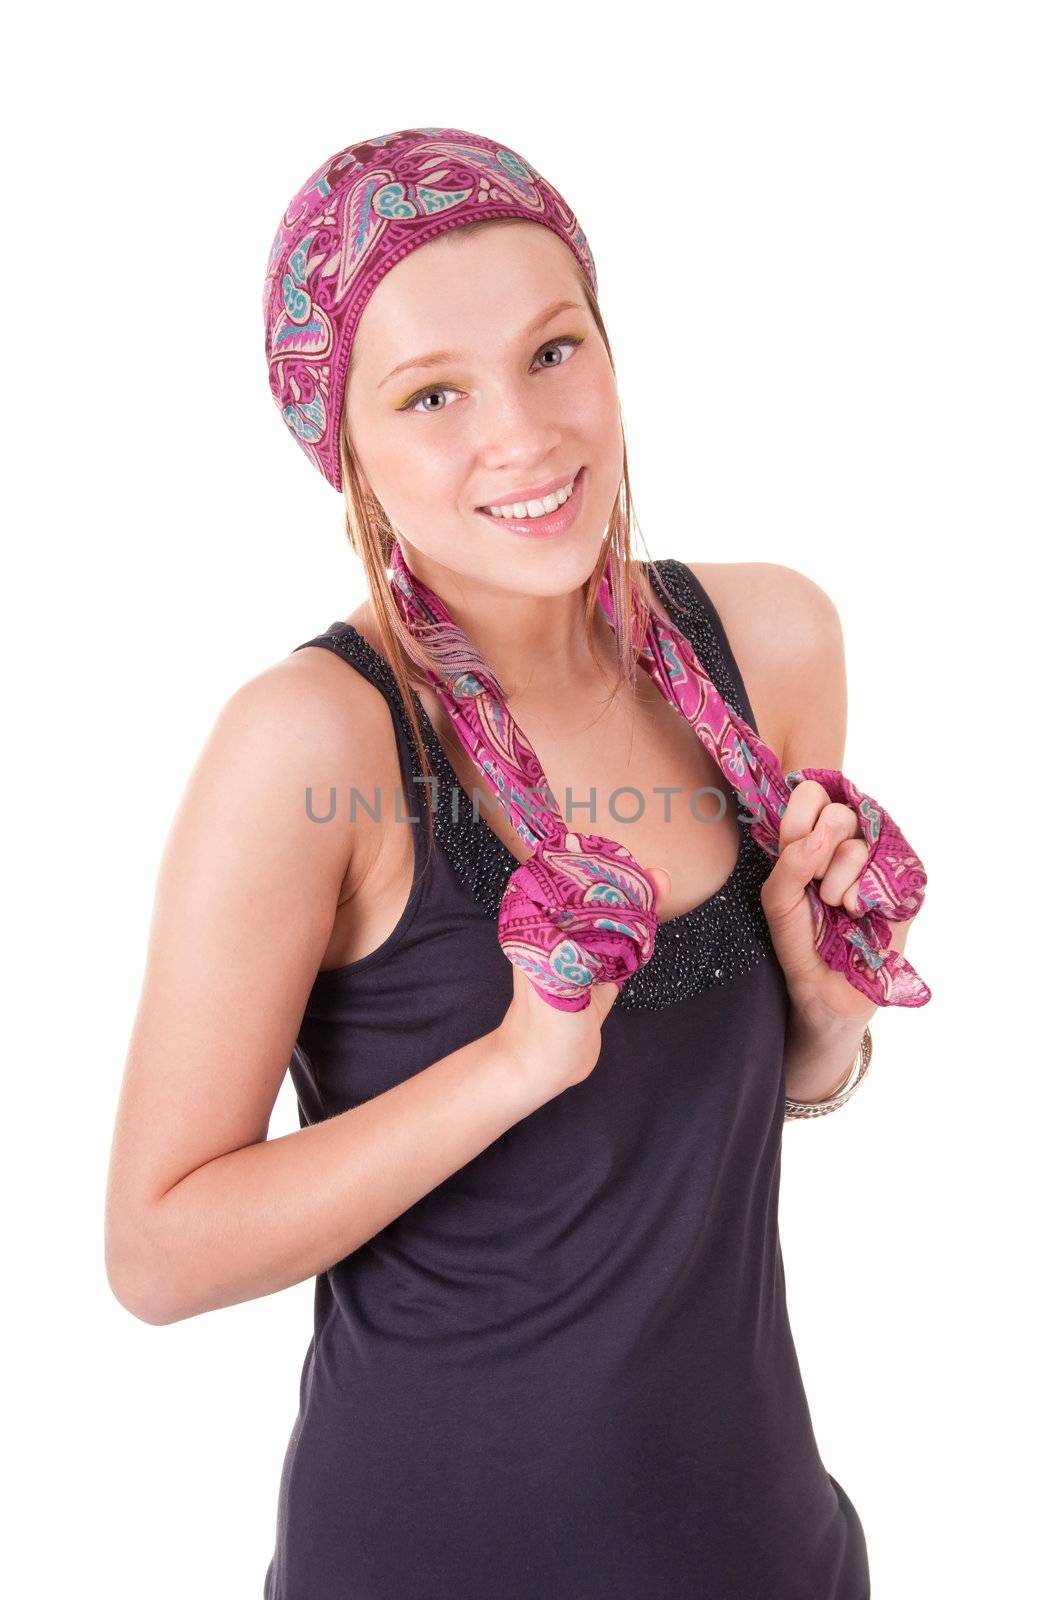 Young woman in headscarf isolated on white background